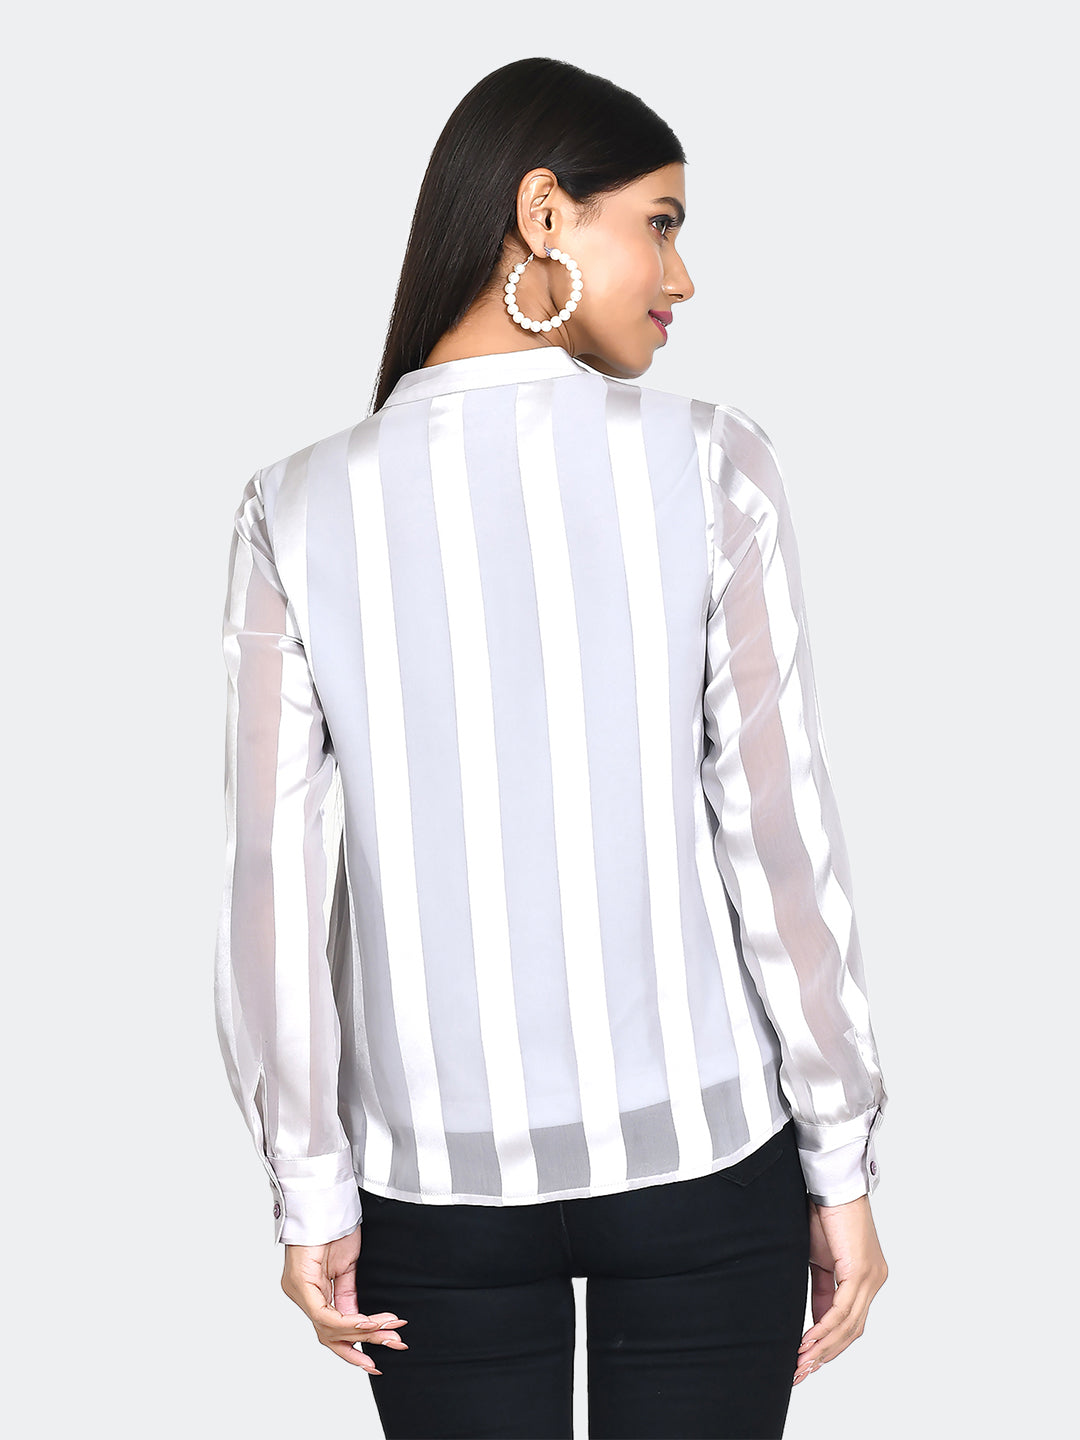 Grey Striped Straight Top For Women